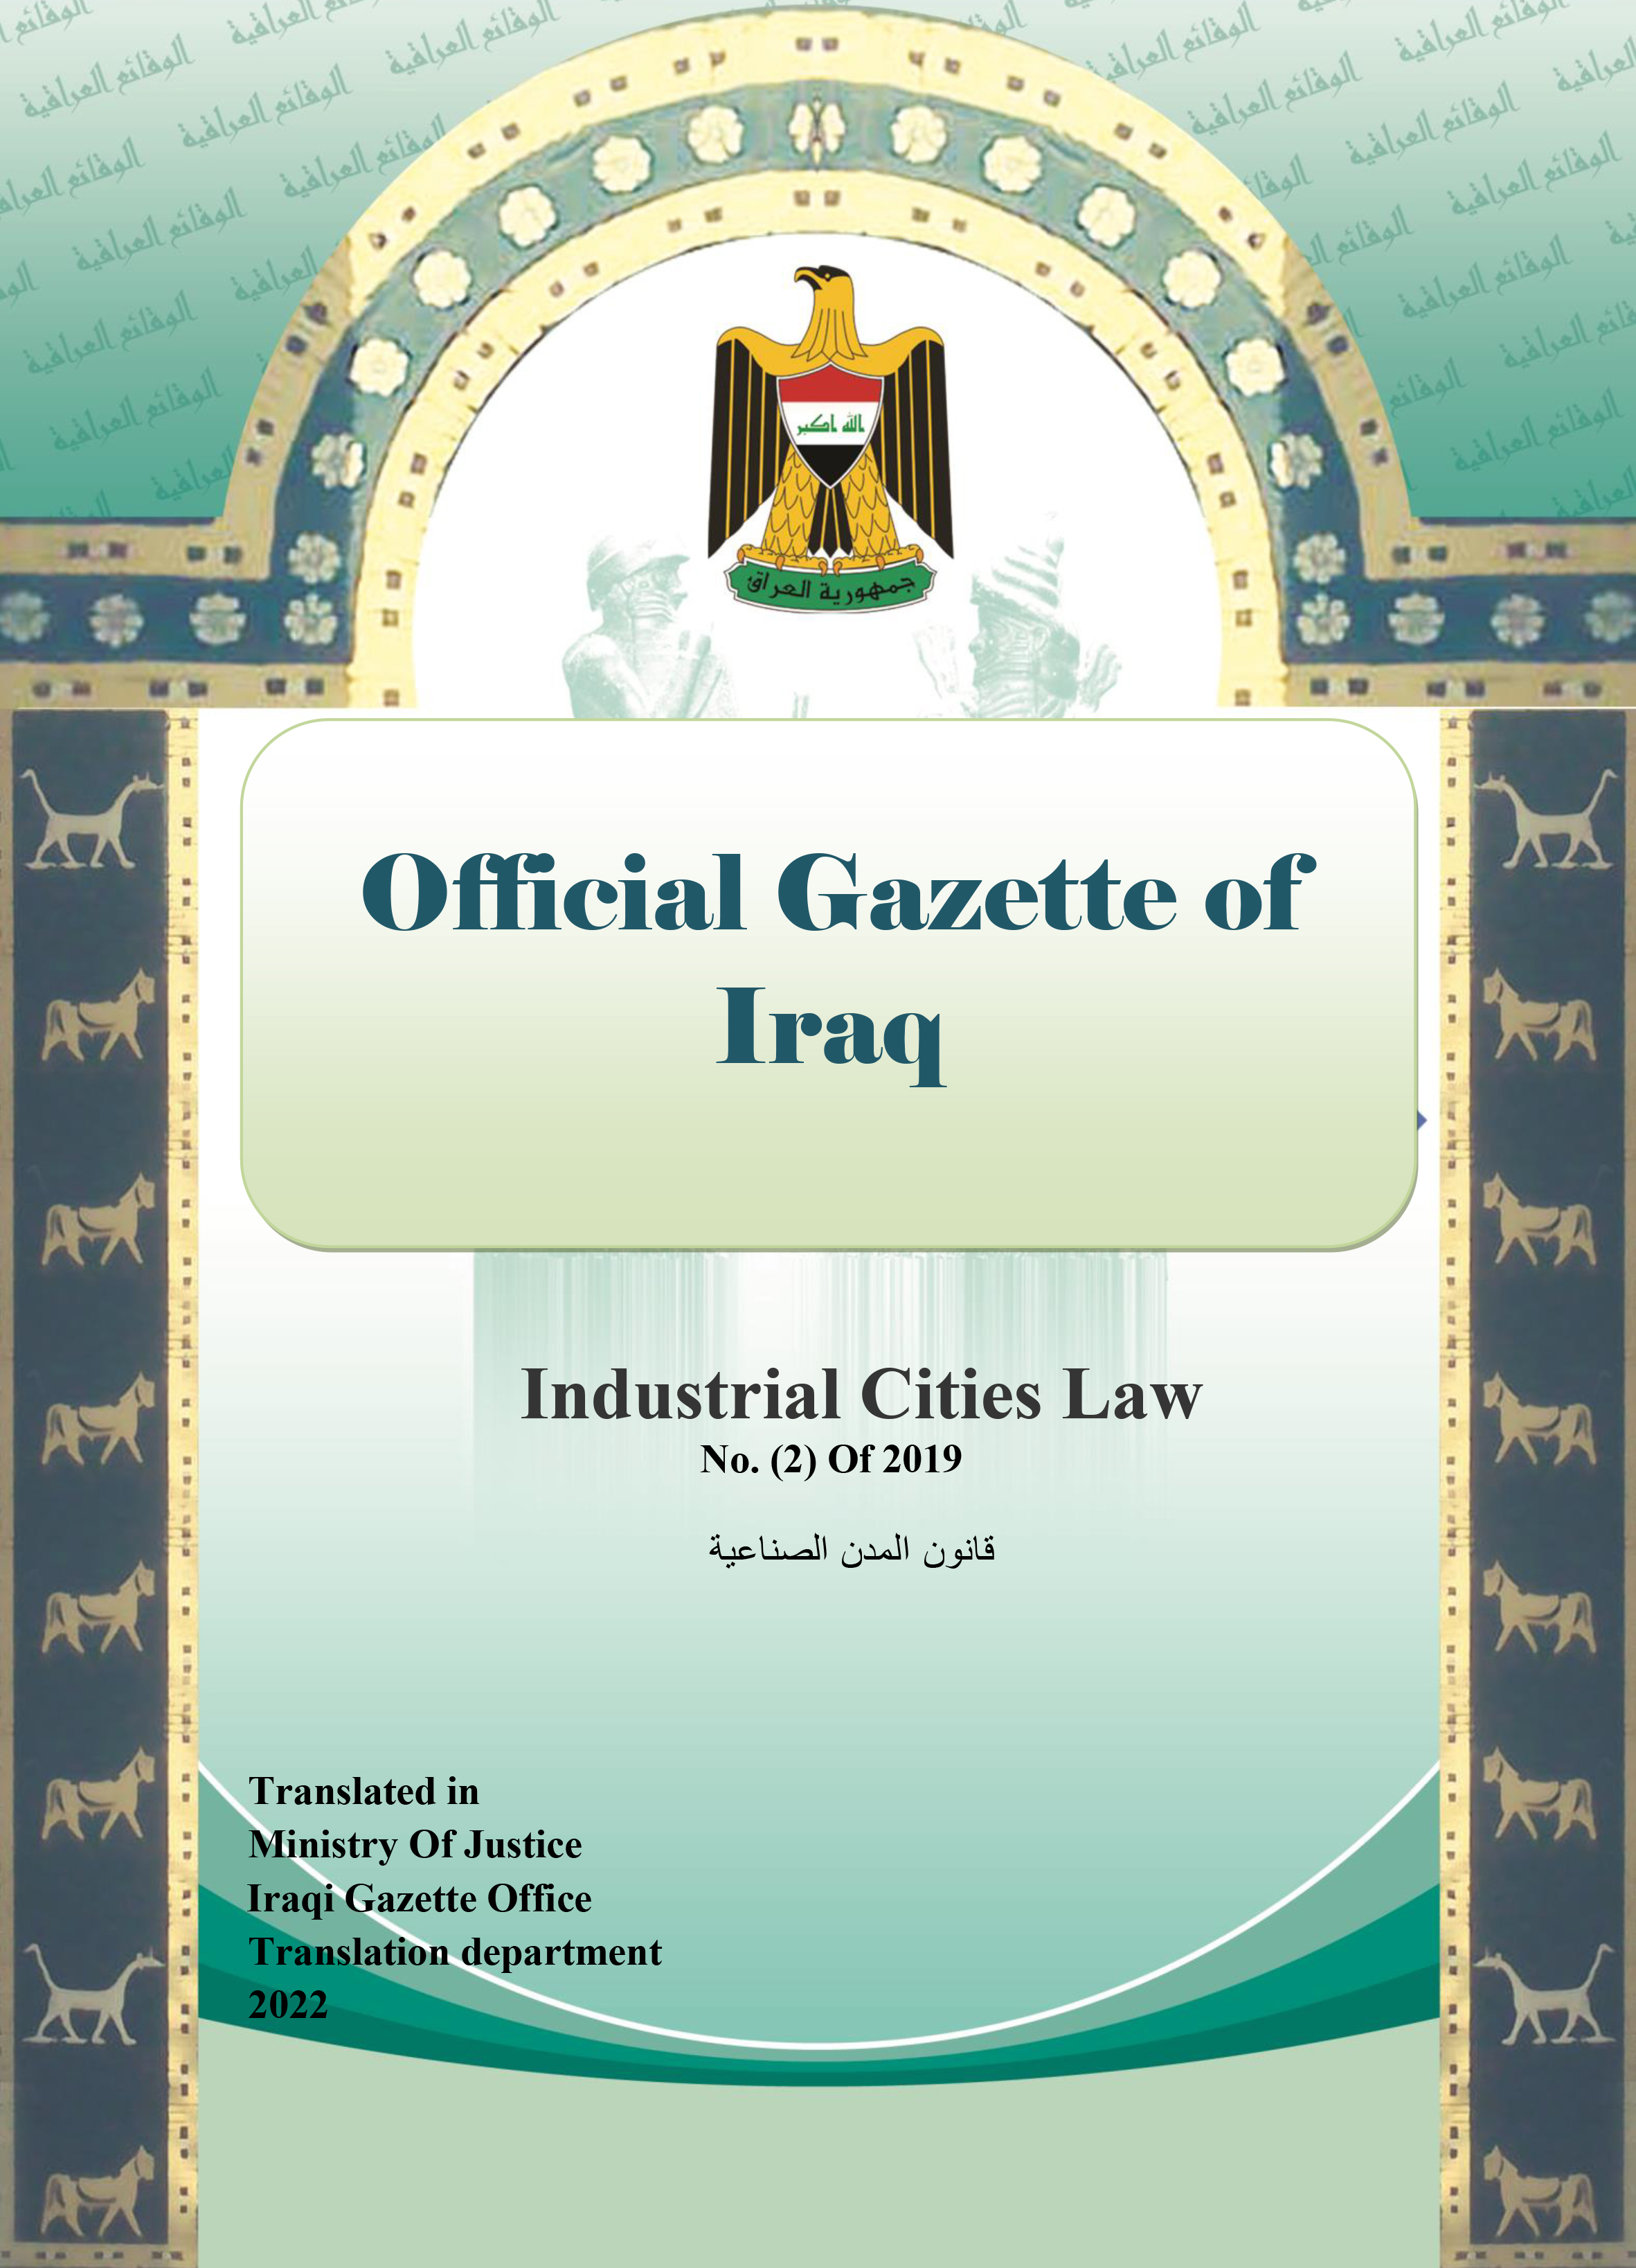 Industrial Cities Law